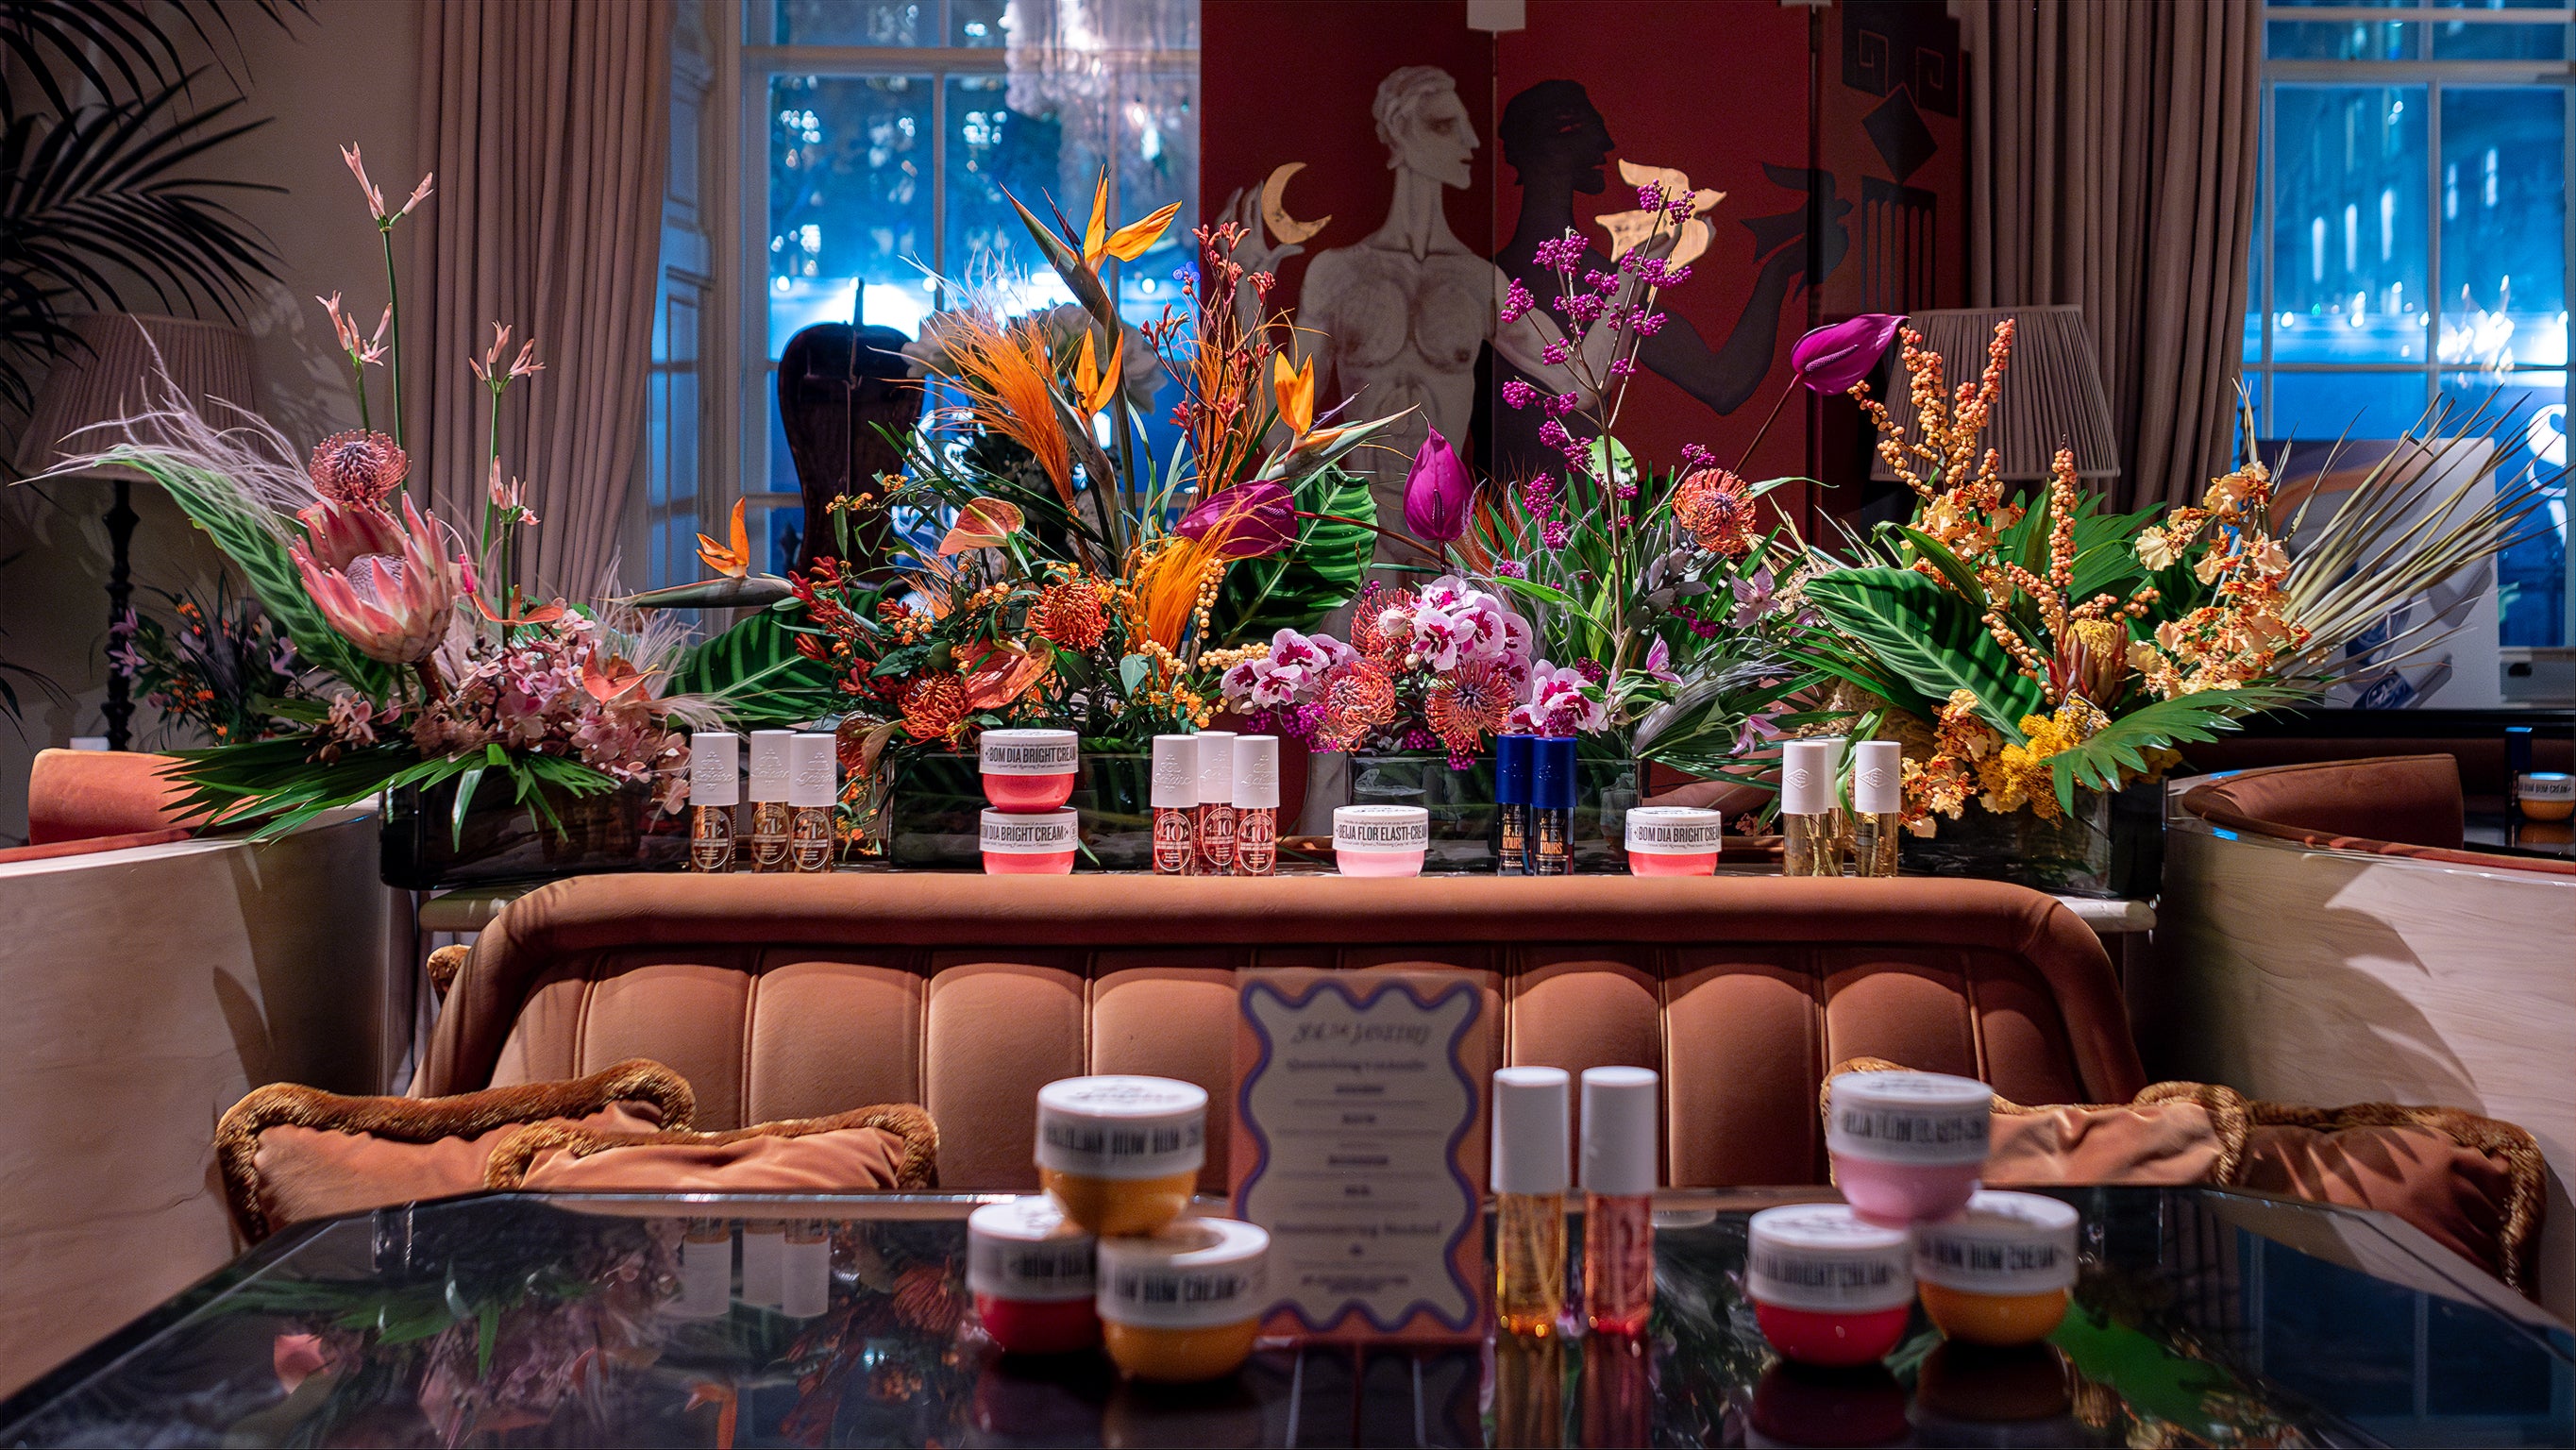 A lavish array of Sol de Janeiro's beauty products elegantly presented on a grand table amid Amaranté London's striking floral arrangements, with a backdrop of chic interior decor at Maine Mayfair restaurant.